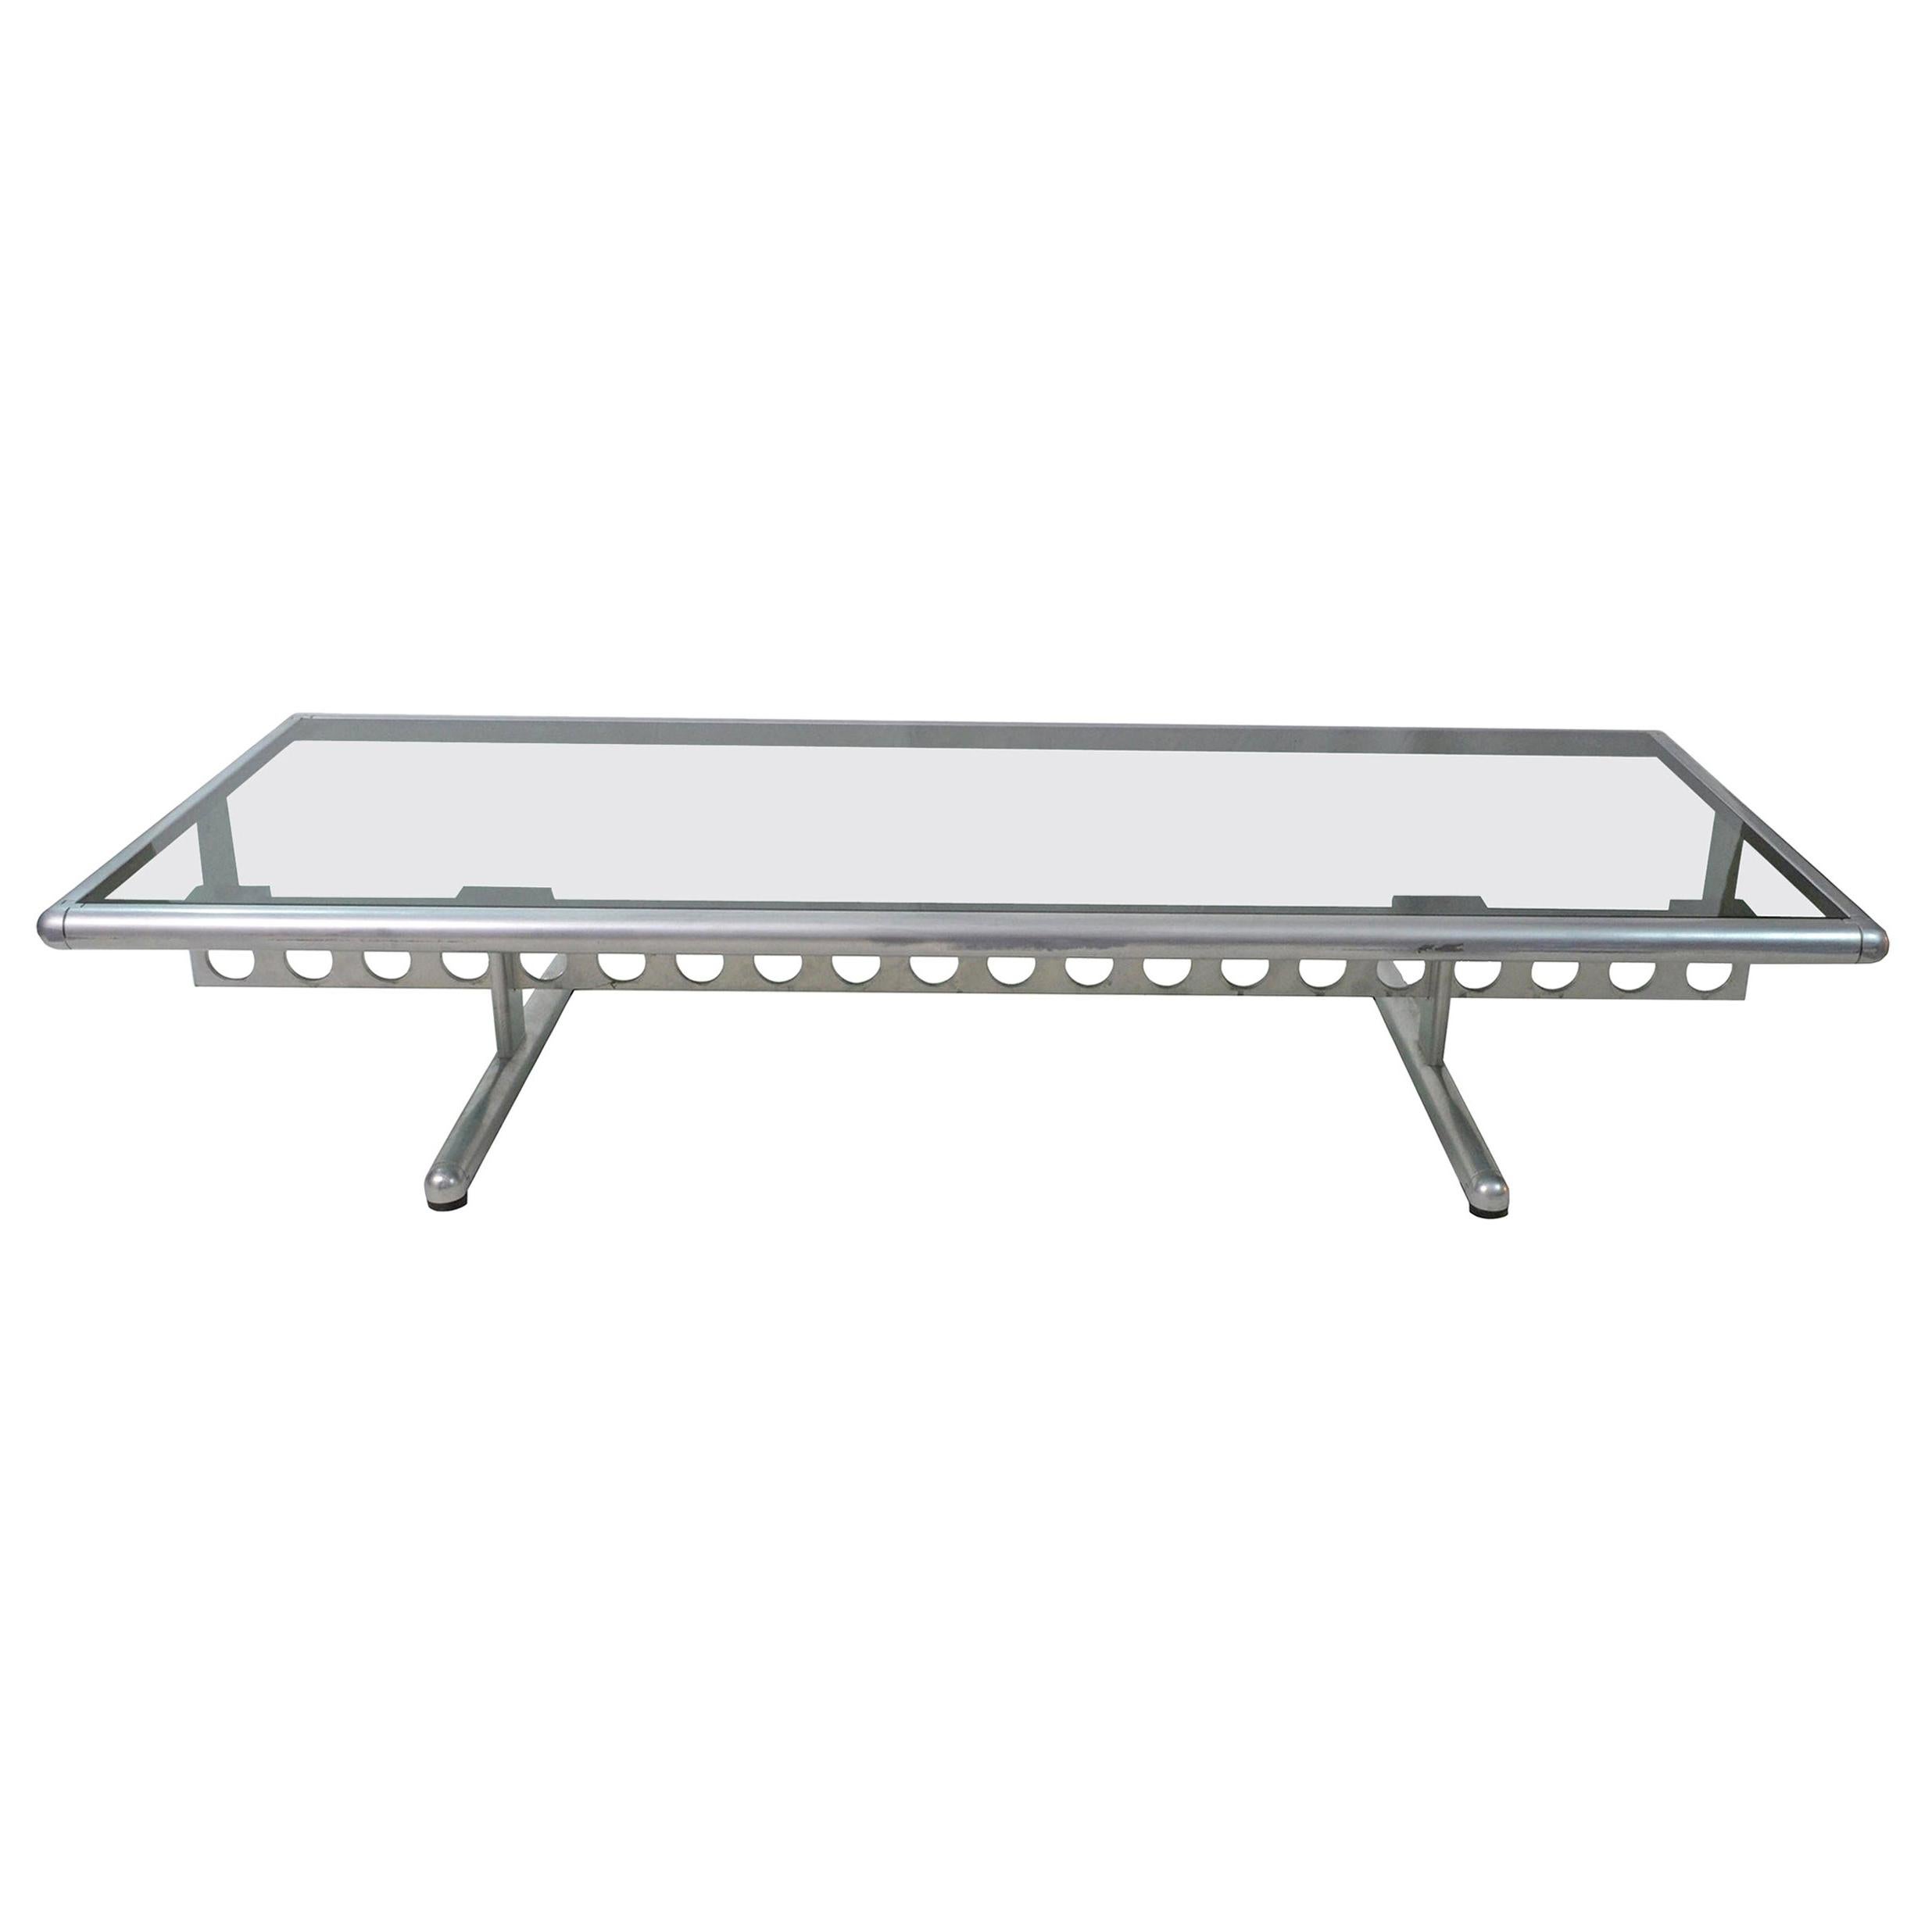 Italian Chromed Steel and Smoked Glass Ouverture Coffee Table for Frau, 1980s